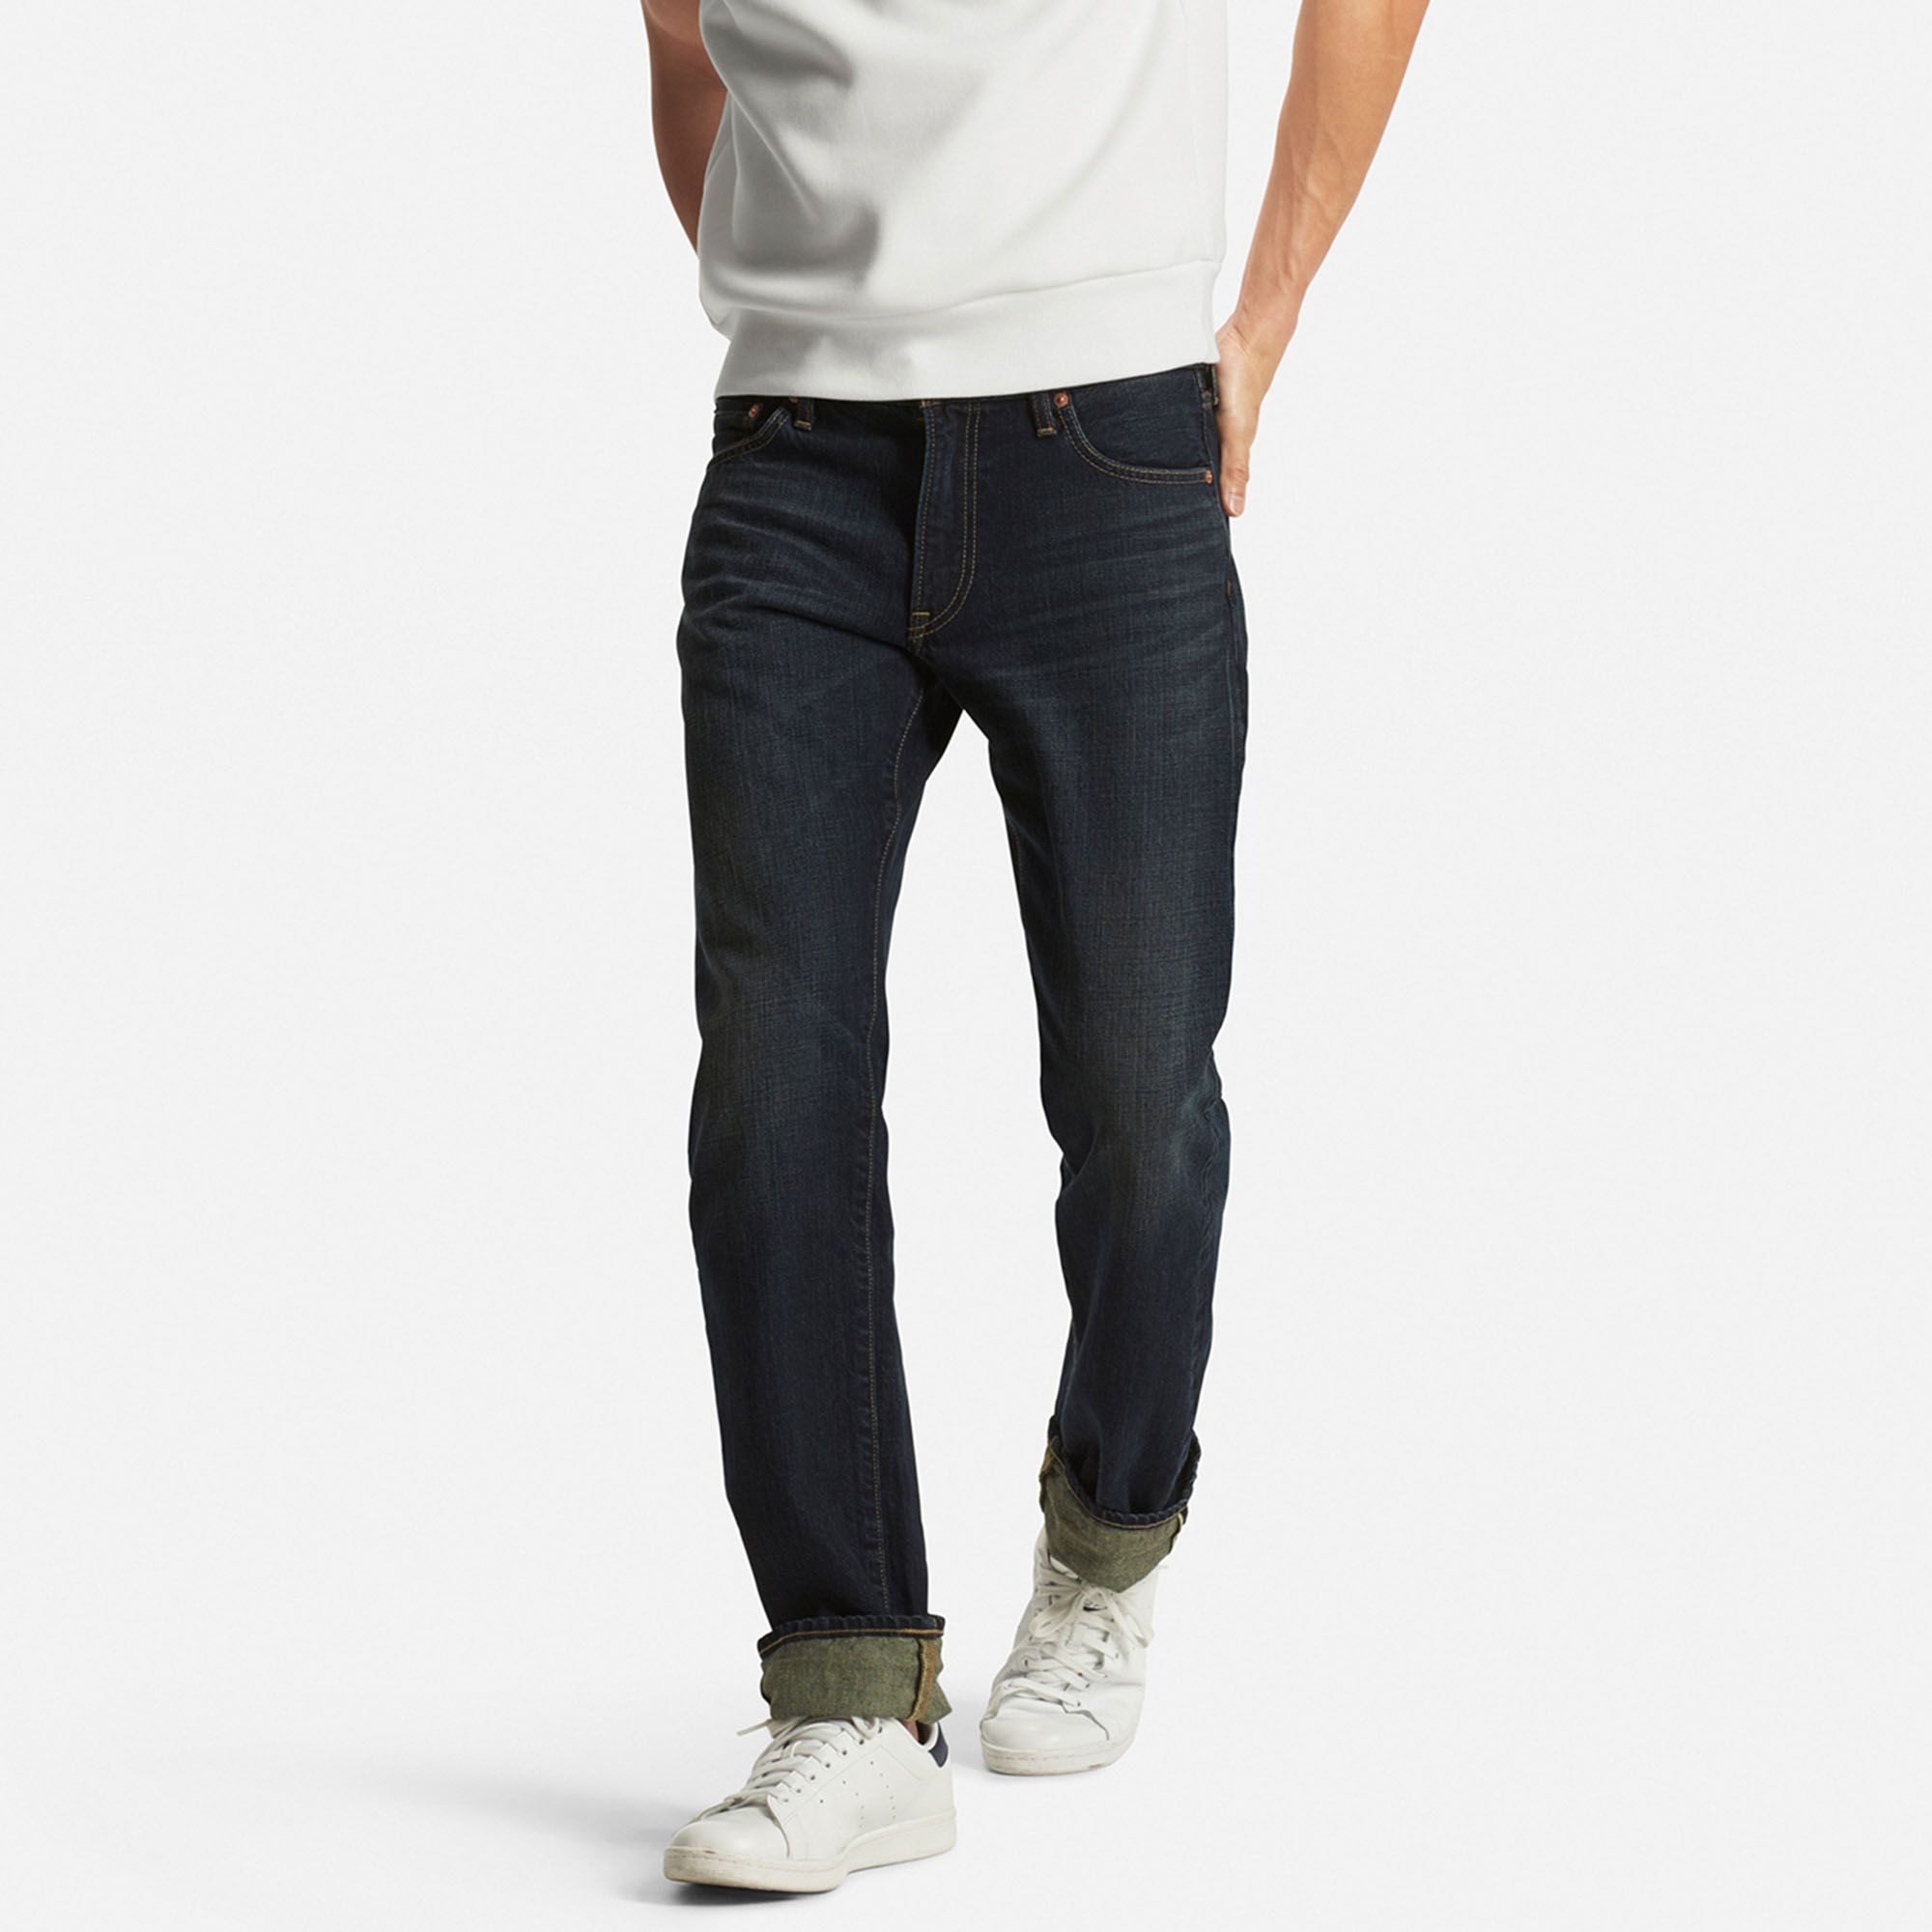 uniqlo jeans shrink